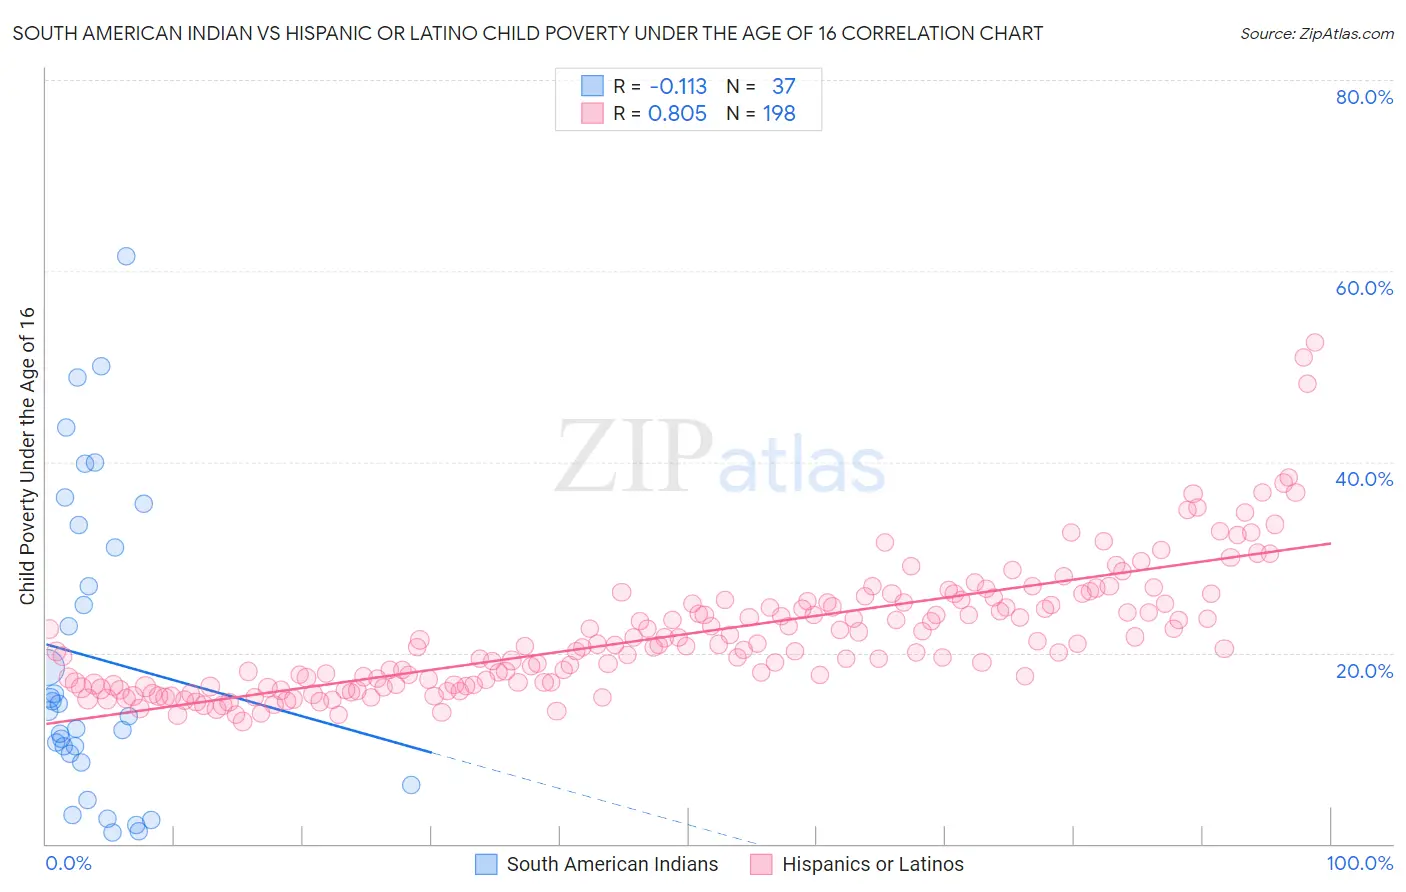 South American Indian vs Hispanic or Latino Child Poverty Under the Age of 16